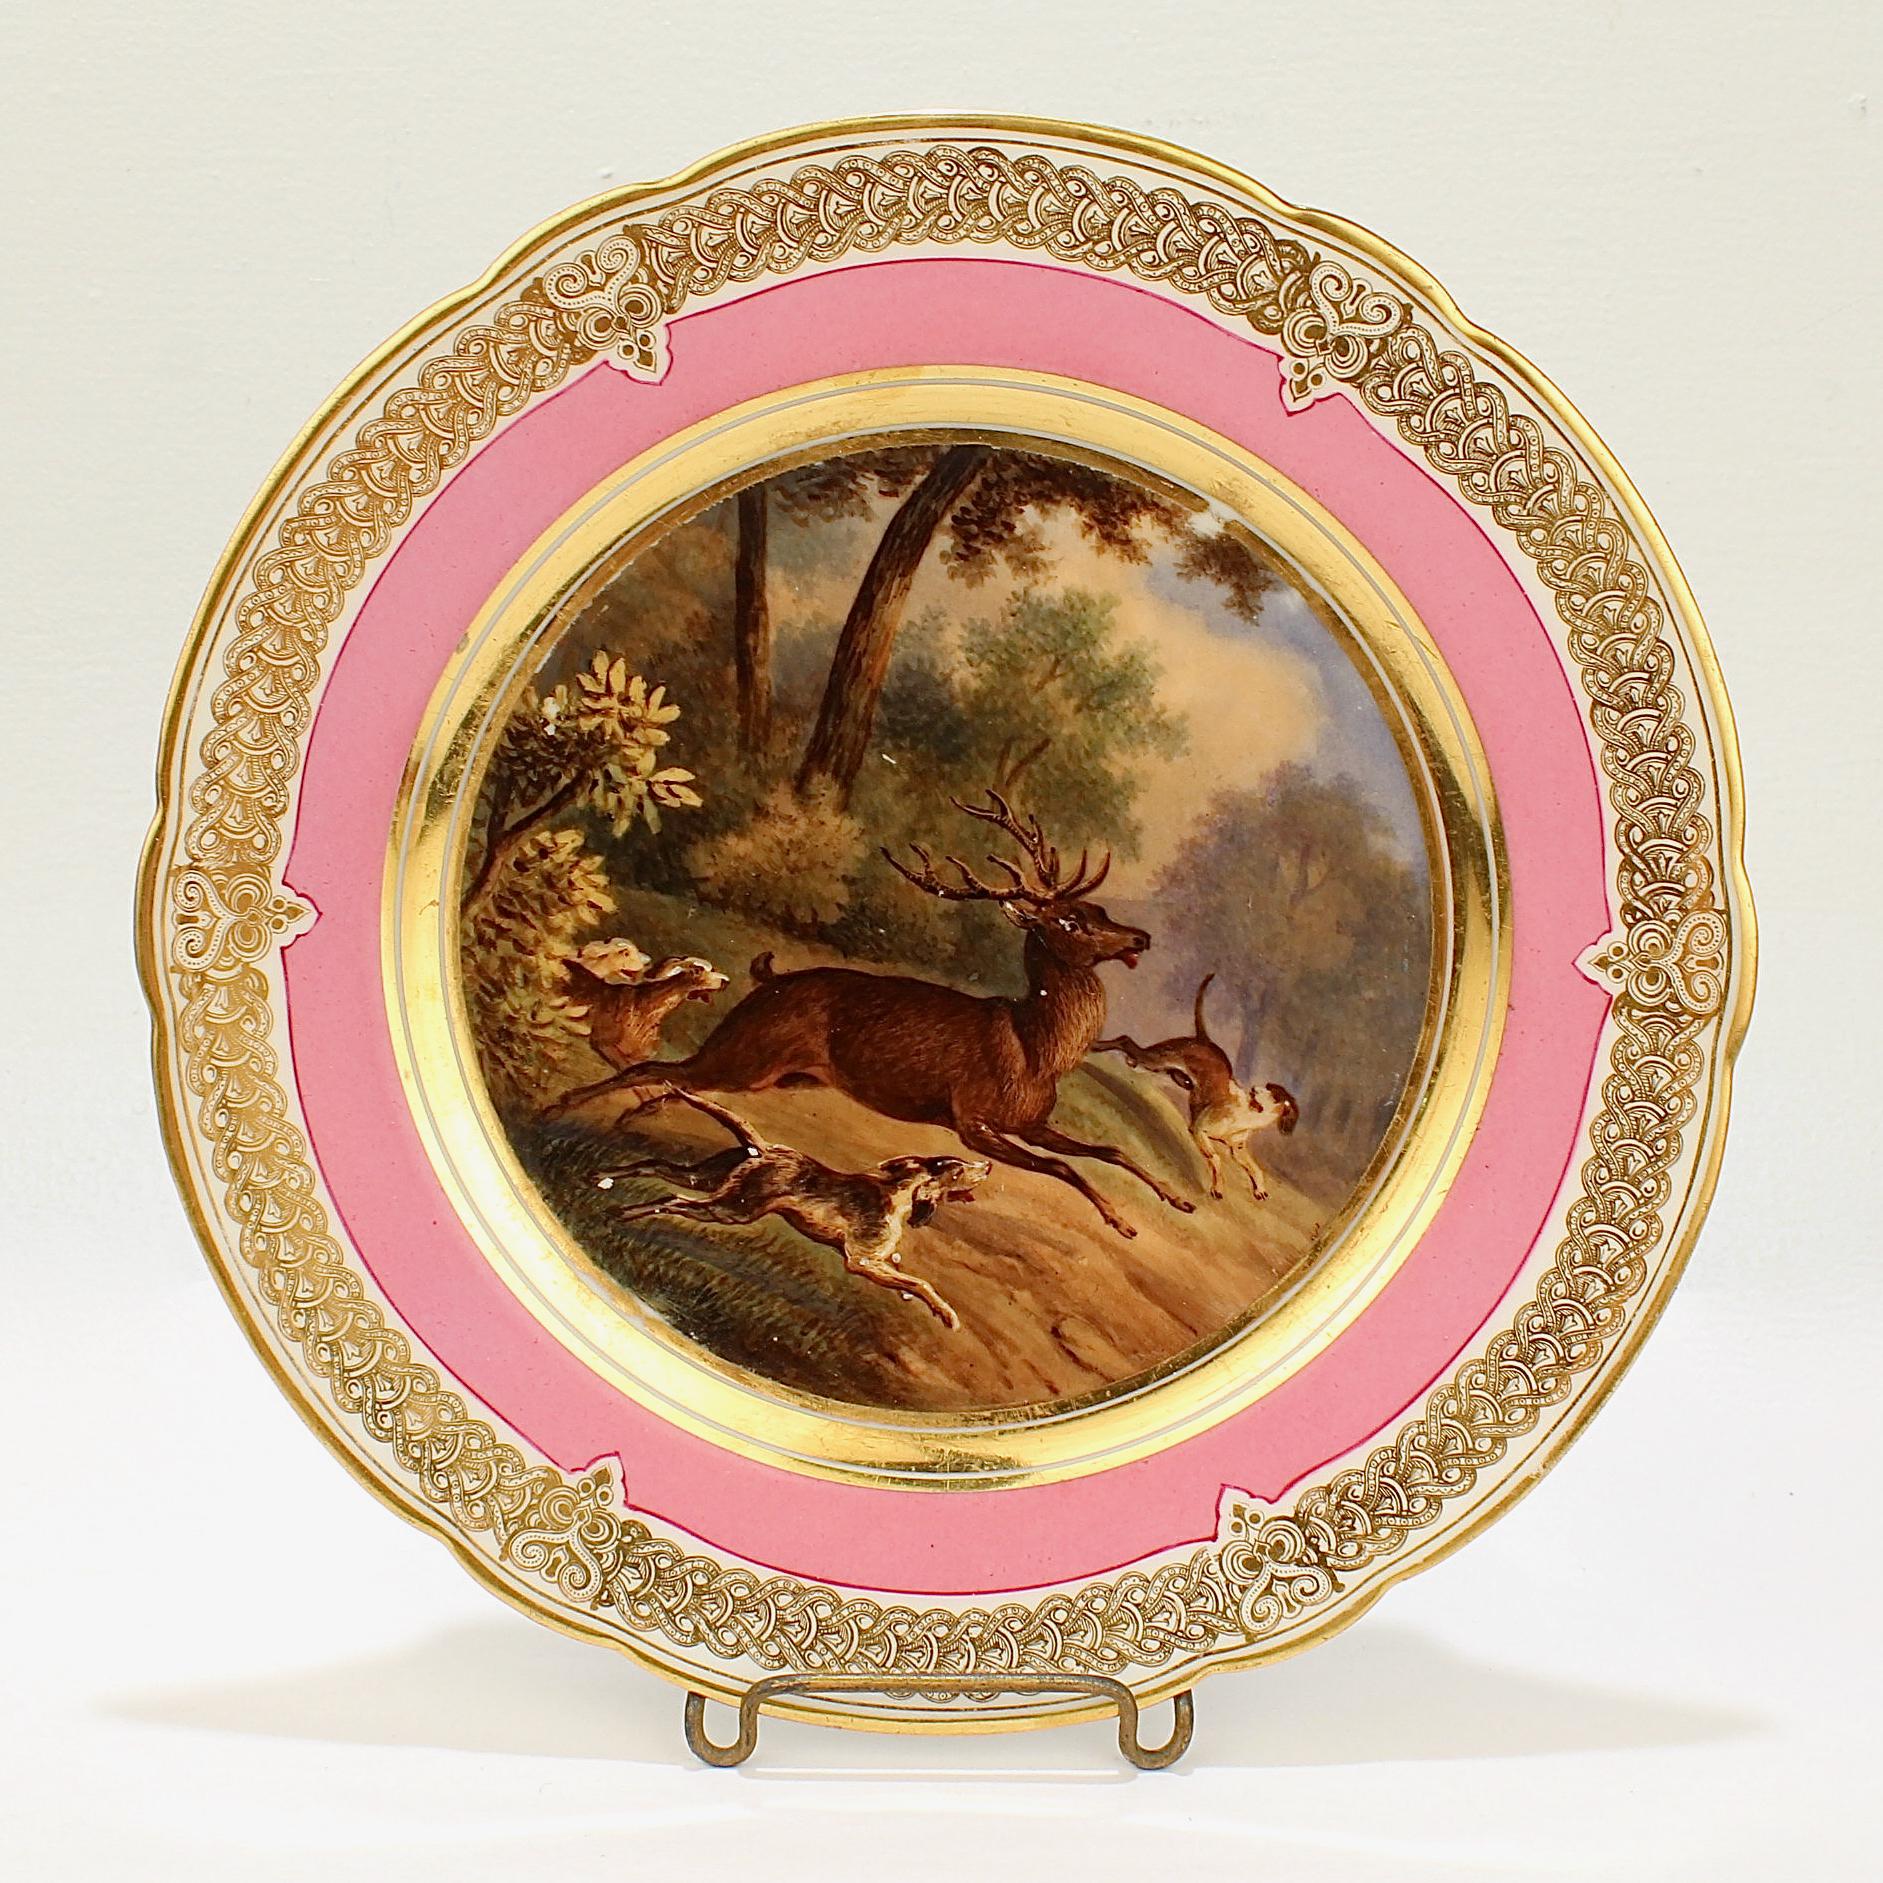 A wonderful antique 19th century Paris porcelain plate.

With a hand painted scene of a hunt scene in a bucolic landscape including a large buck (10 point) and 3 hounds in chase. 

It has a rich pink border and an elaborate gilt design to the